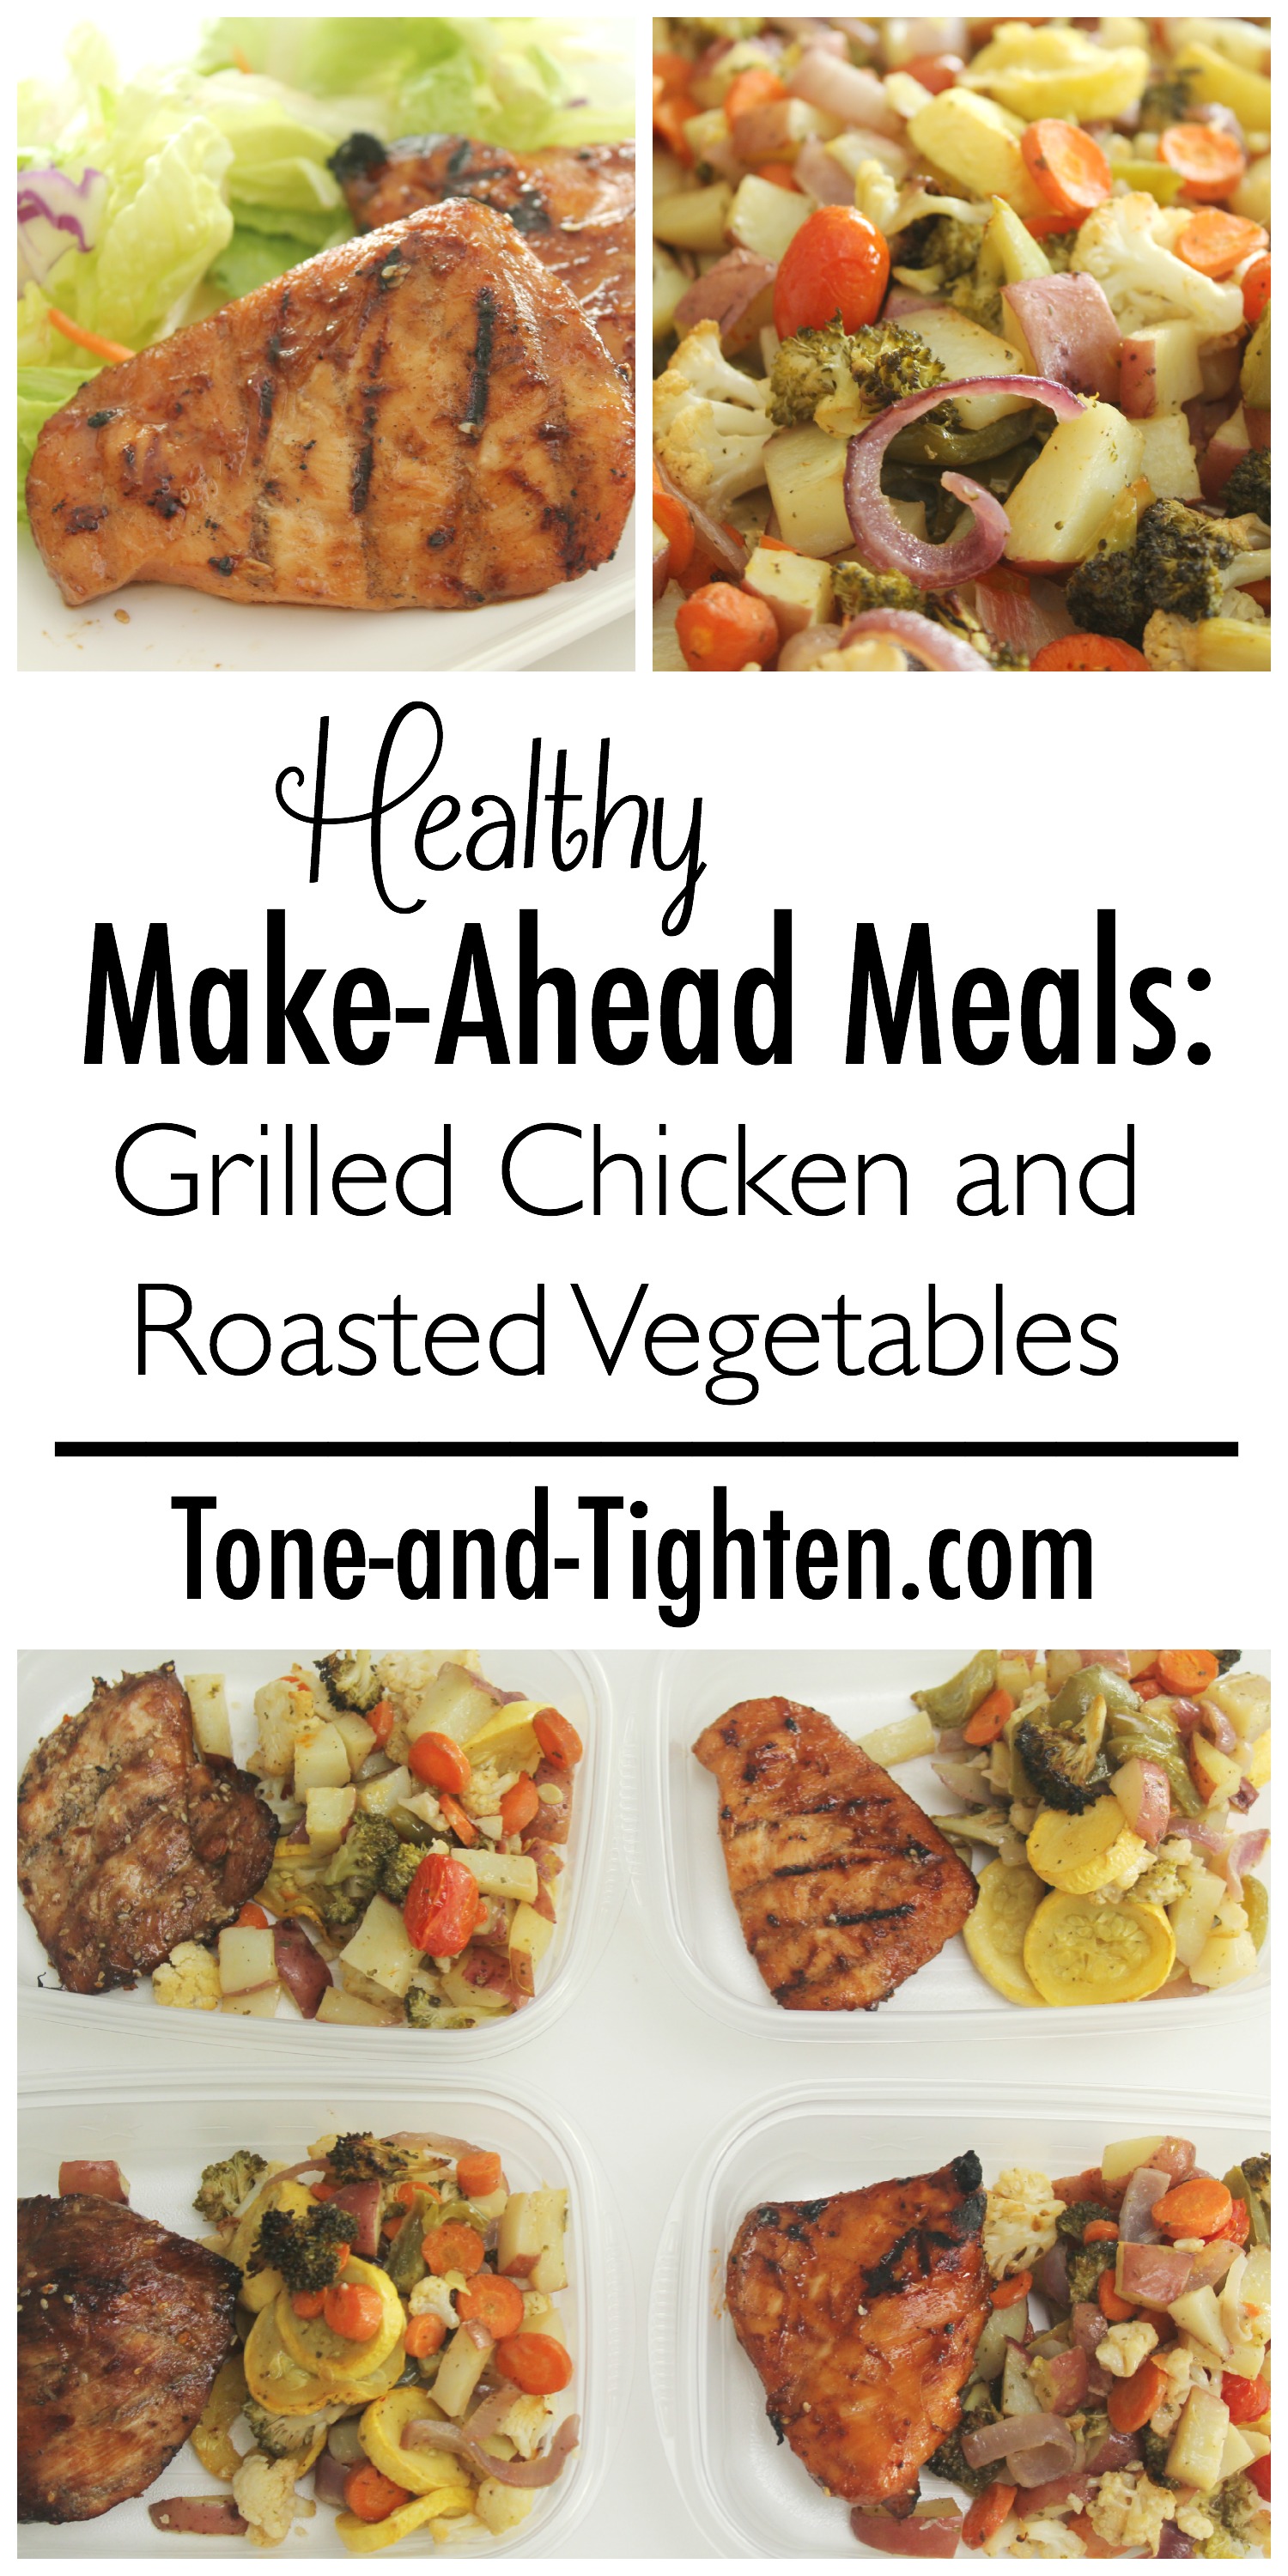 Healthy Make-Ahead Meals: Grilled Chicken and Roasted Vegetables